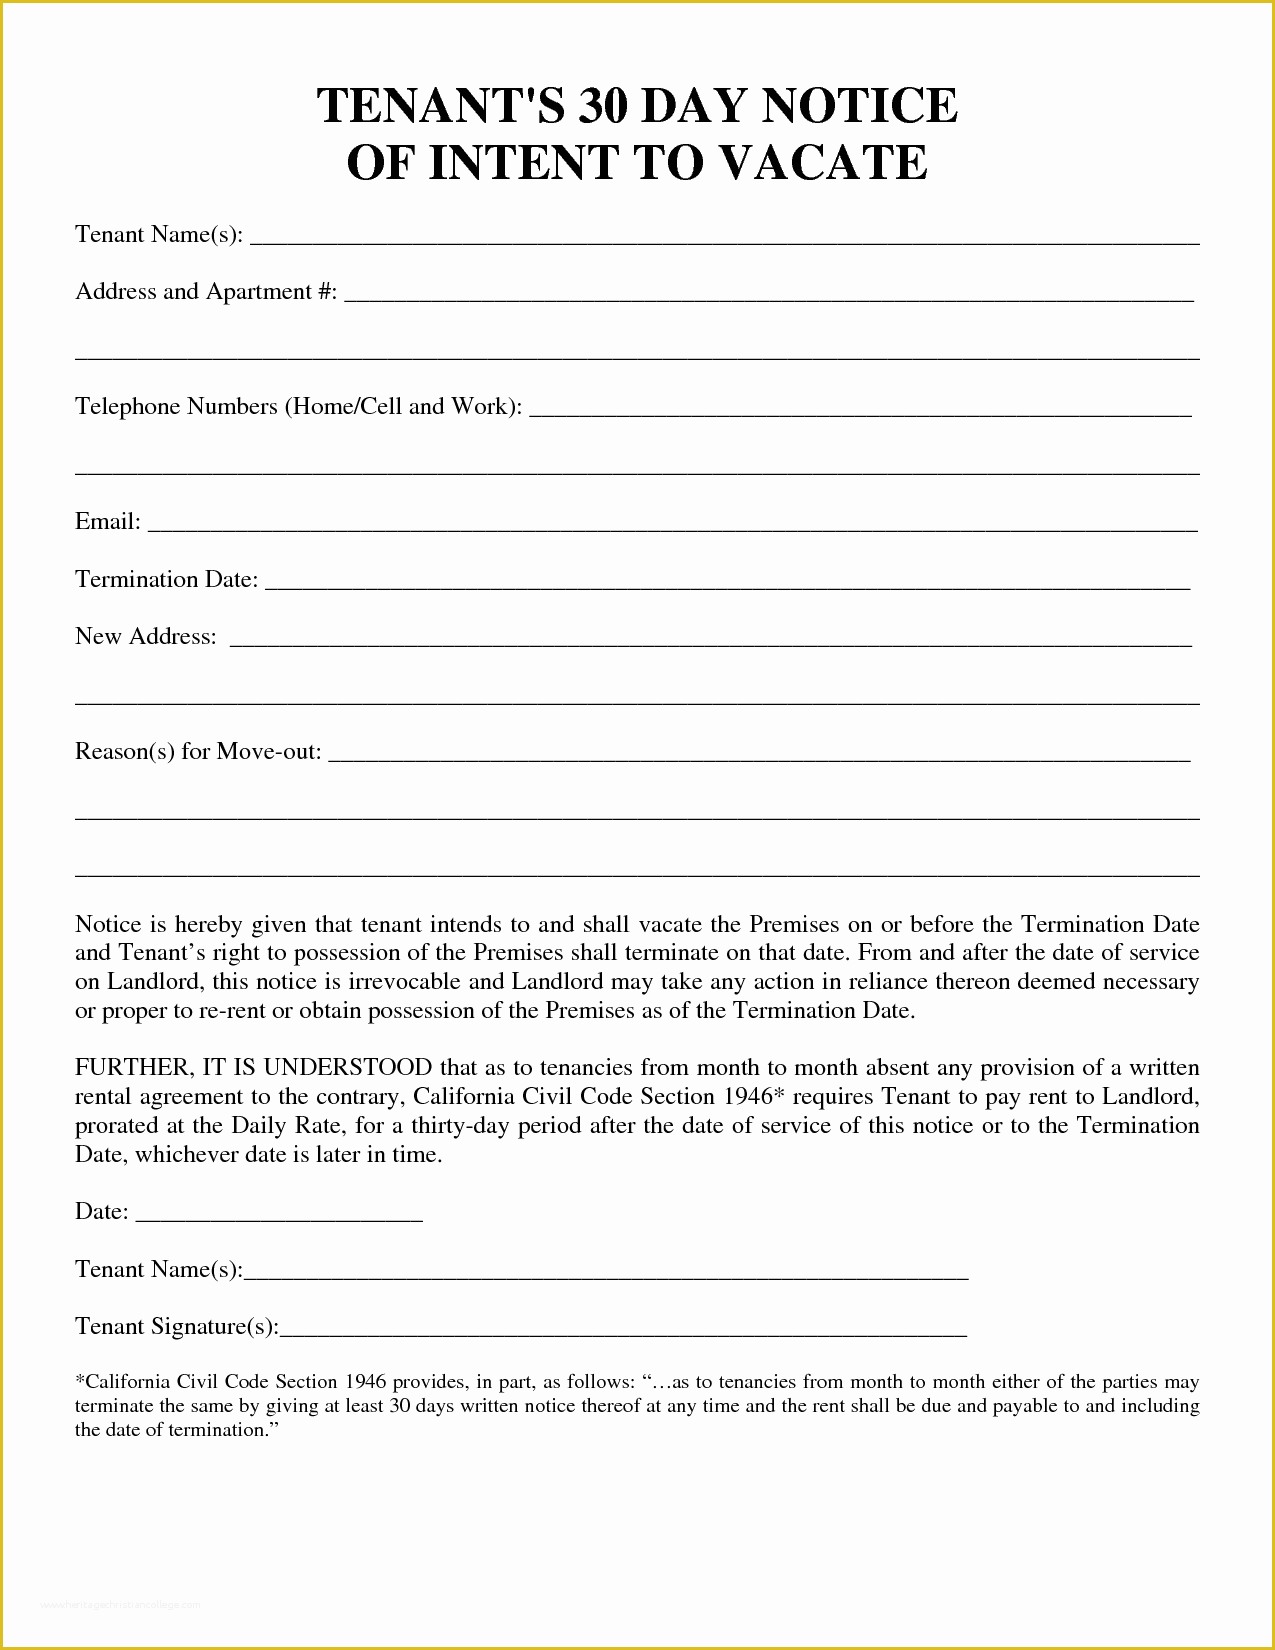 free-printable-30-day-eviction-notice-template-of-best-s-of-30-day